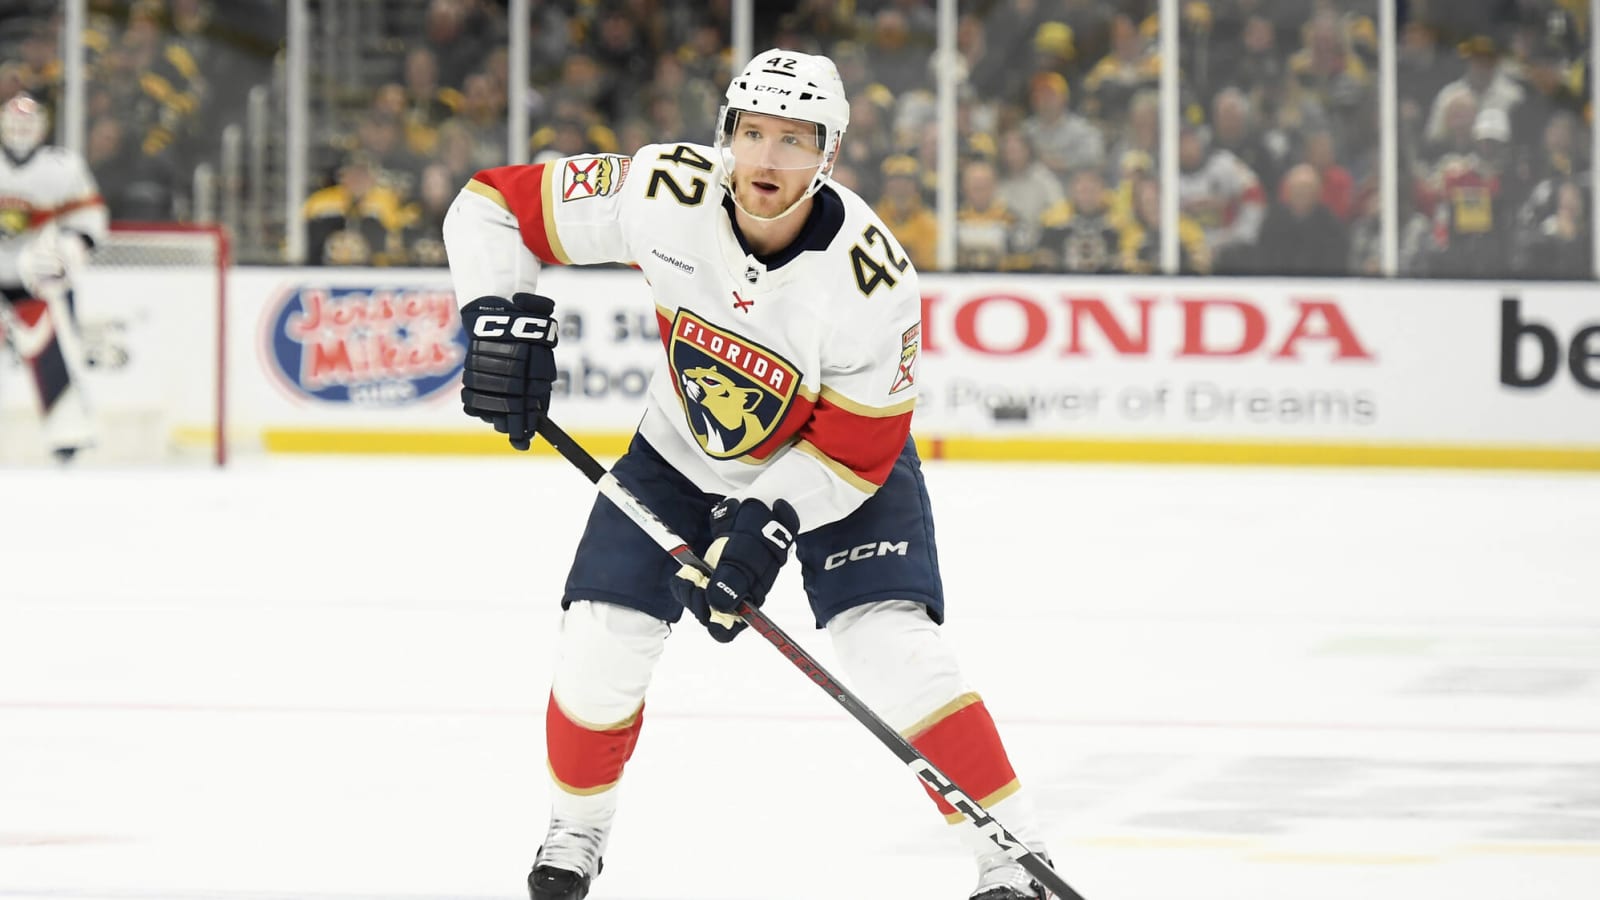 Spotlight on Gus Forsling After Sending Florida Panthers to ECF